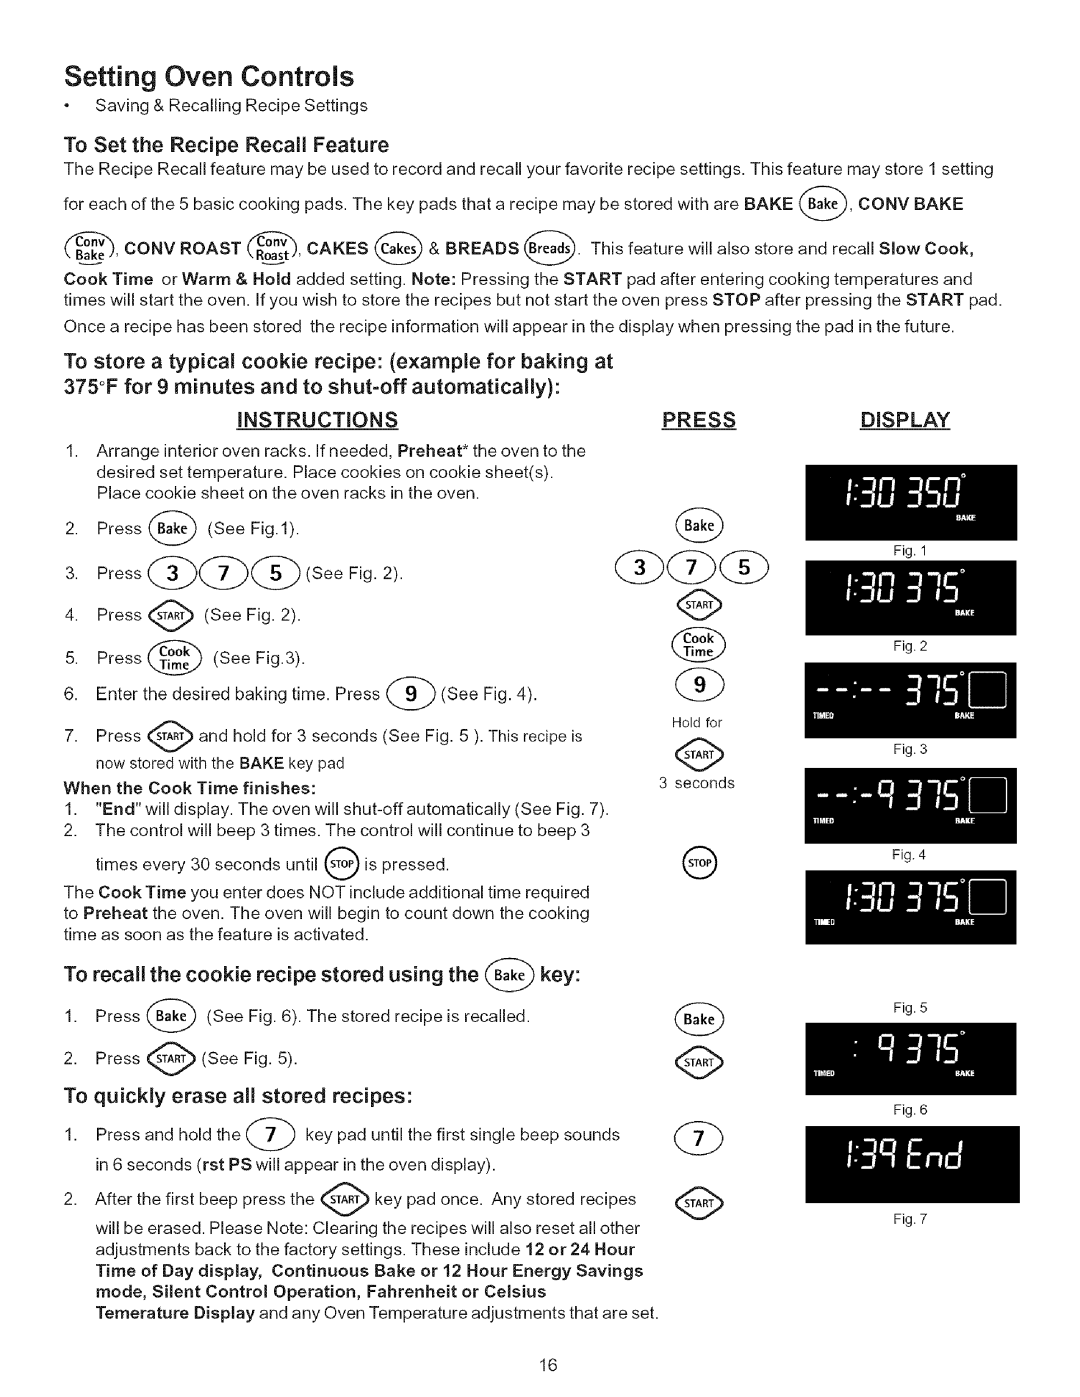 Kenmore 790.7943 manual Setting Oven Controls, To Set the Recipe Recall Feature, Instructions, Press, Display 